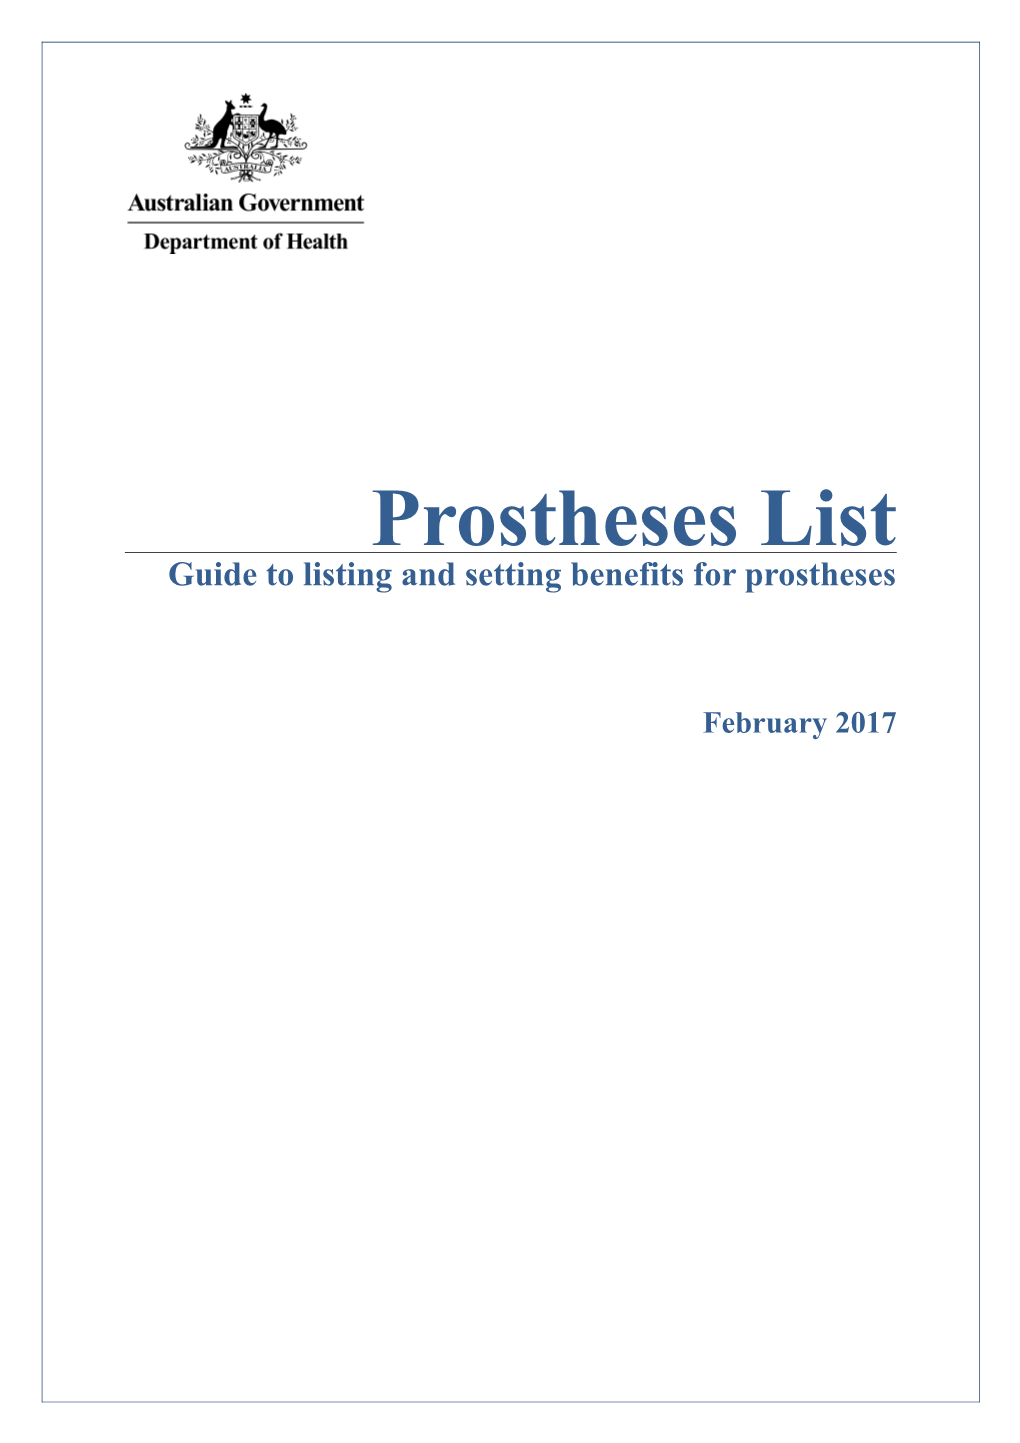 Prostheses List - Guide to Listing